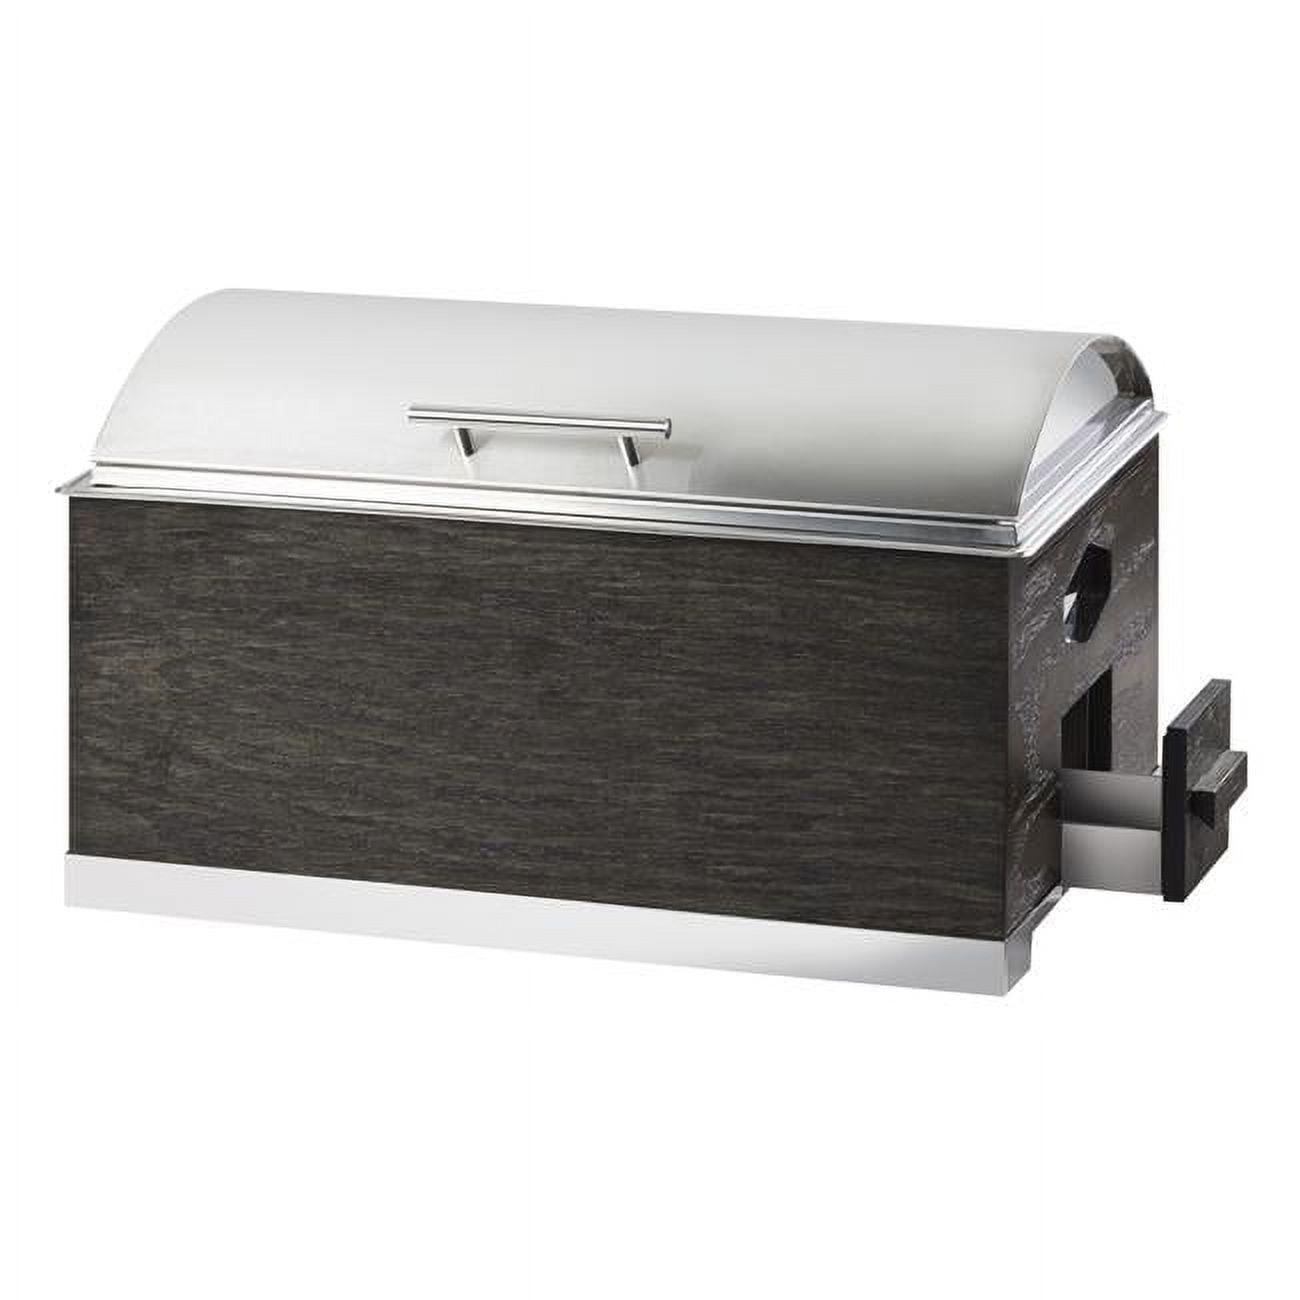 Picture of Cal Mil 3828-87 Cinderwood Stainless Steel Chafer